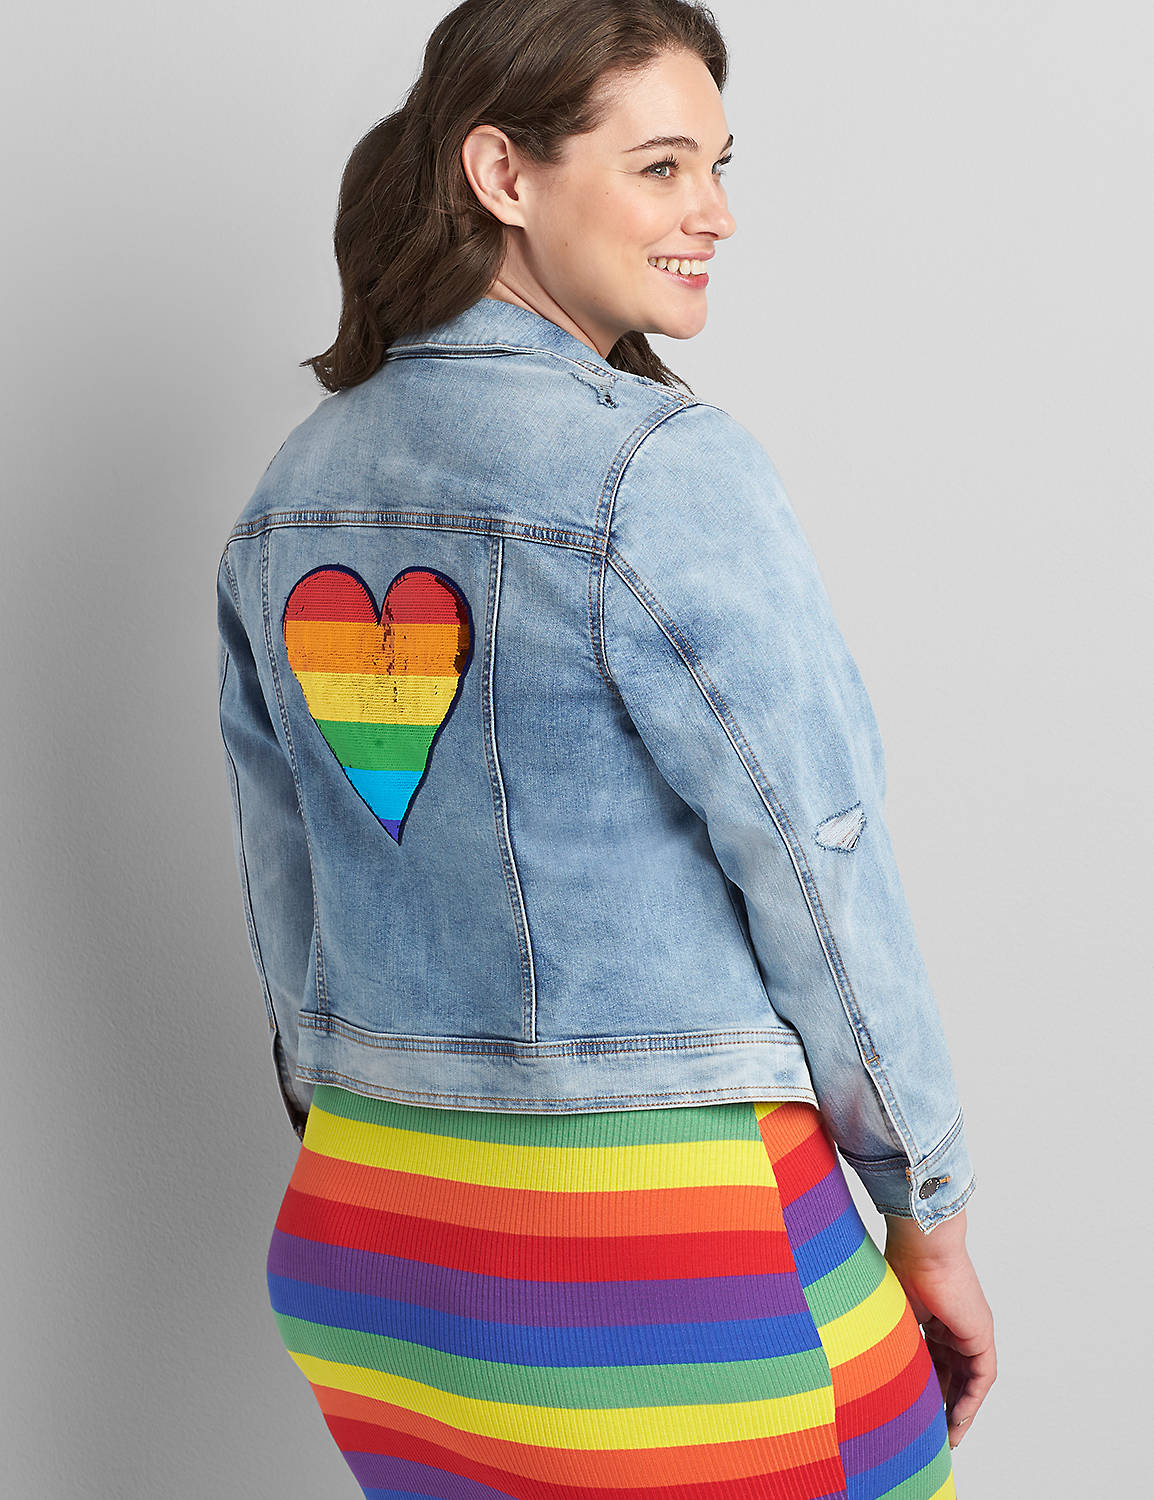 Denim Jacket - Light Wash with Sequin Heart Product Image 2